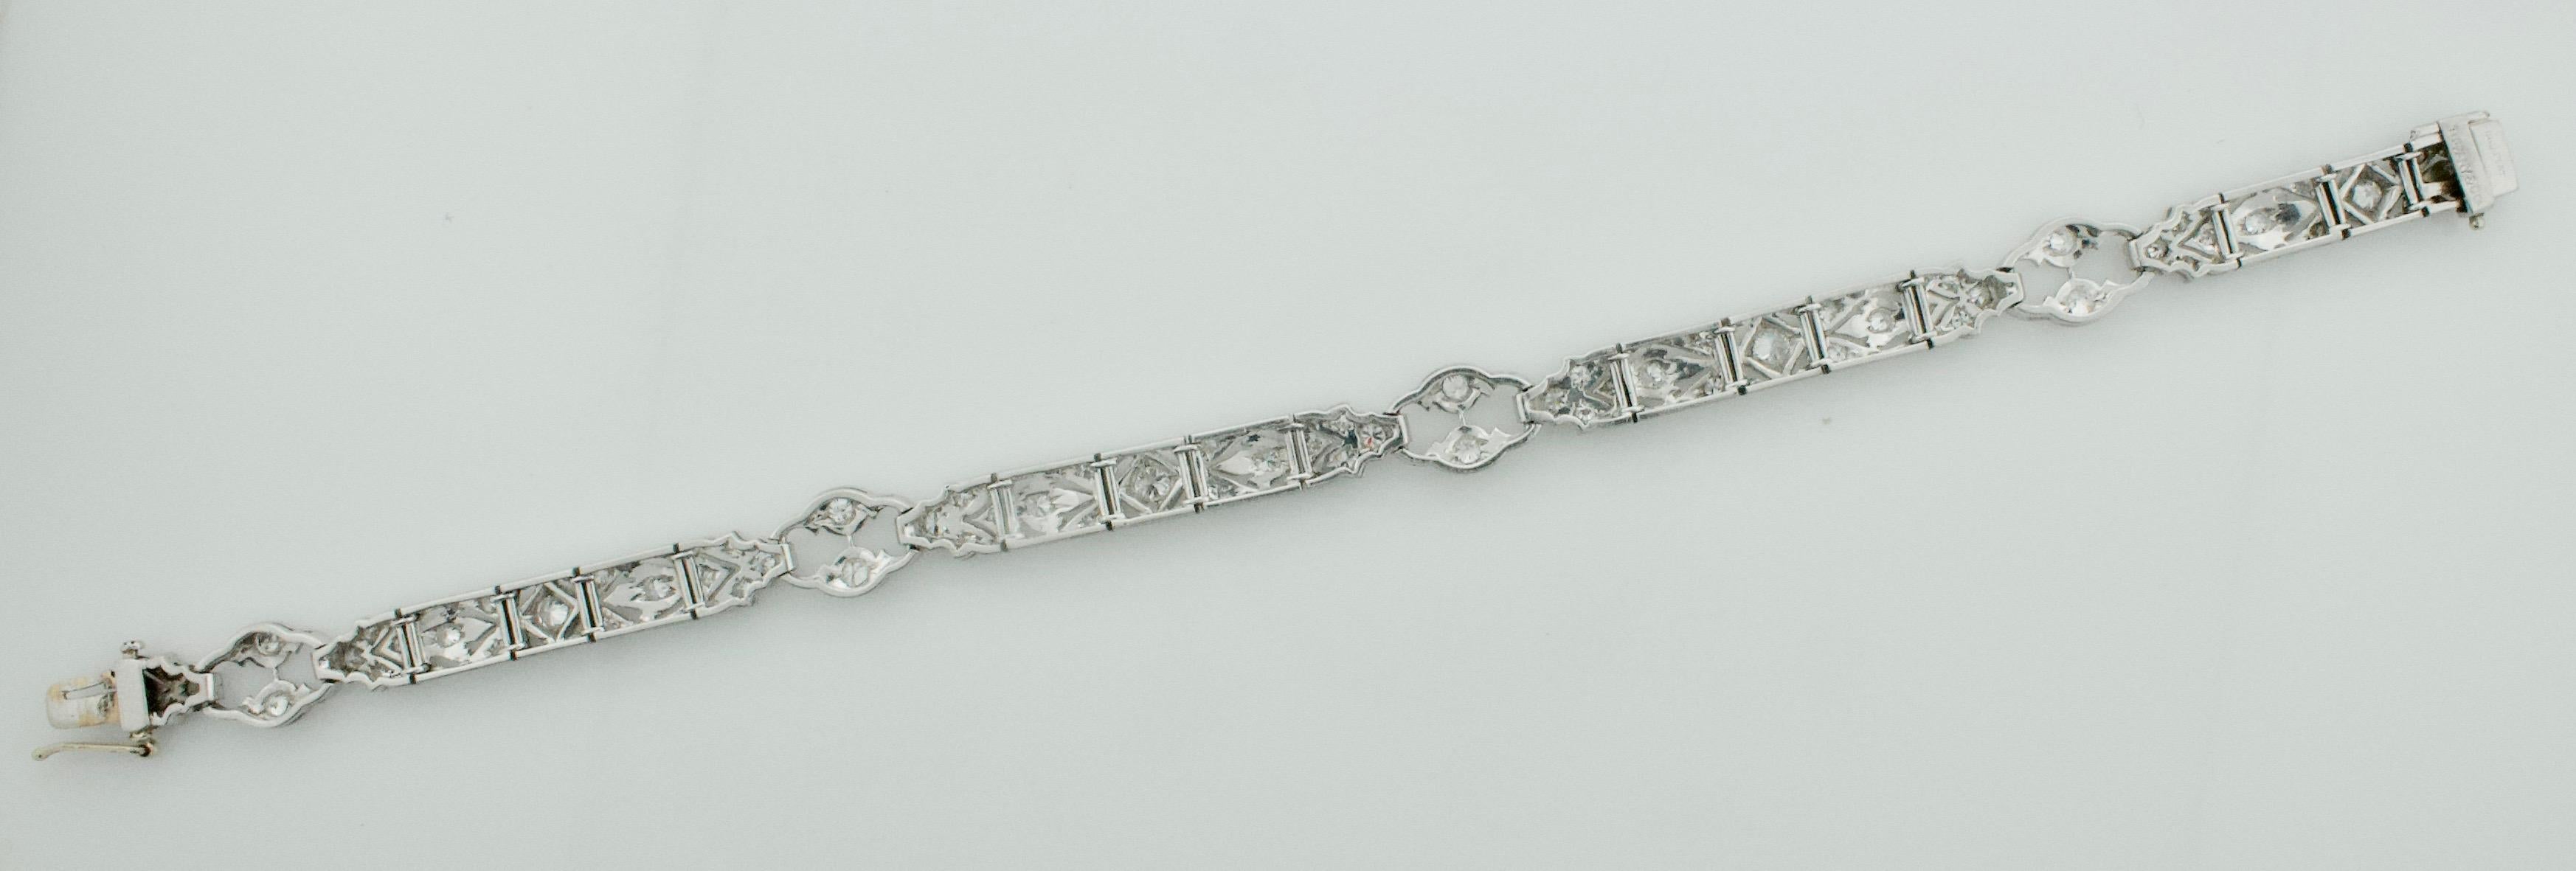 Tiffany and Co. Diamond Bracelet in Platinum Circa 1930's

Sixty Eight Round Brilliant Cut Diamonds weighing 2.35 carats approximately [GH VVS-Si1]

Length  7.25 inches  Width 8 mm